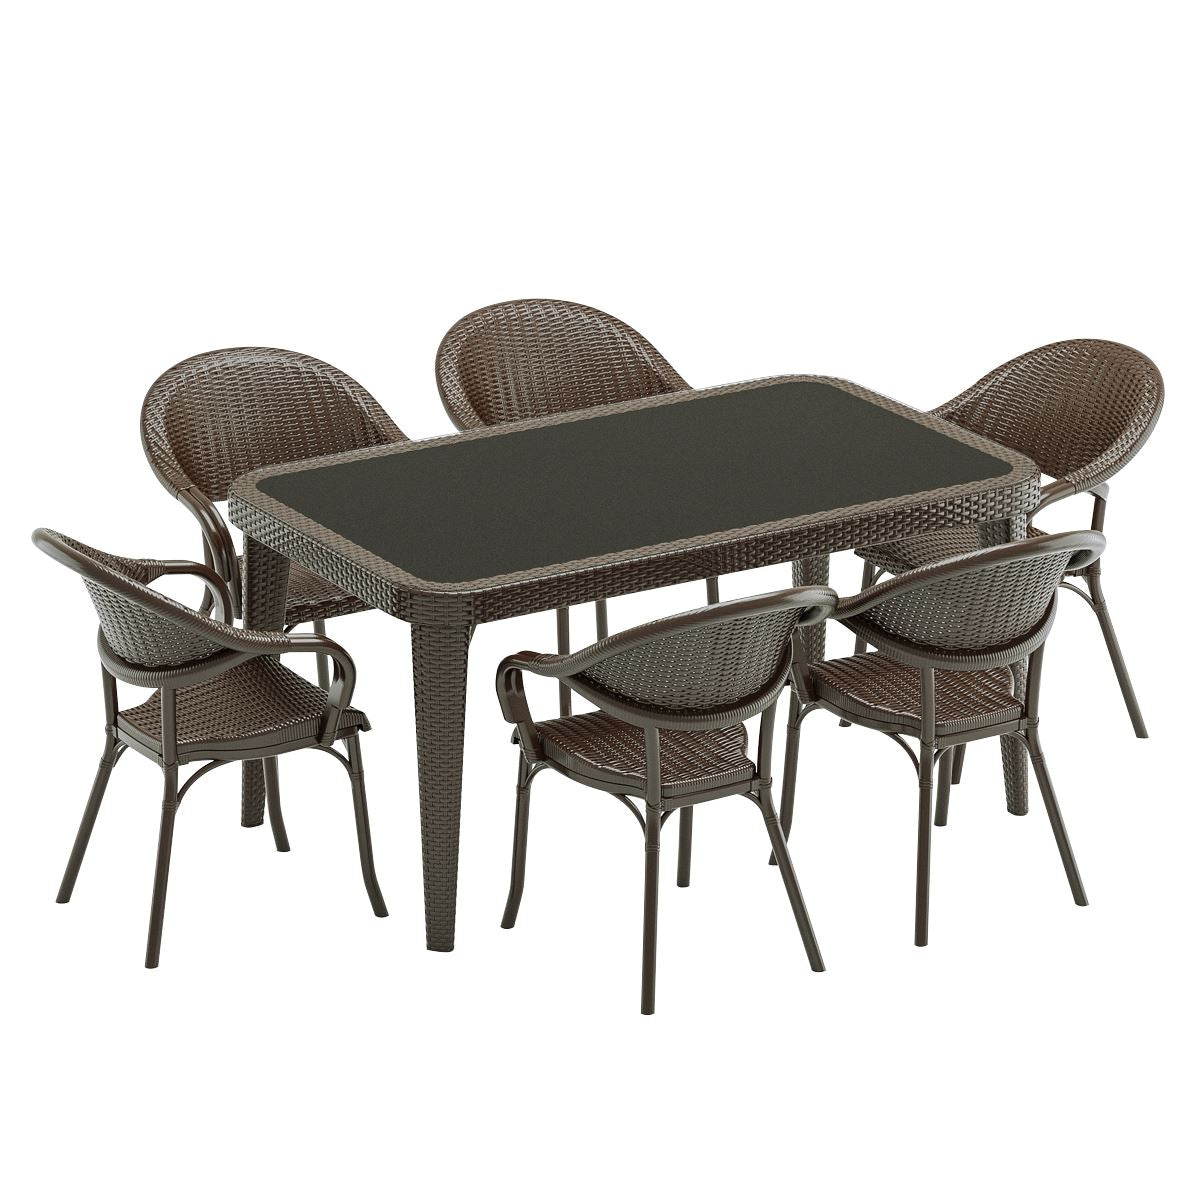 Dellonda 7-Piece Dining Set Weather-Resistant Polypropylene/Fibreglass,Tempered Glass Tabletop, Stackable Chairs - Wenge